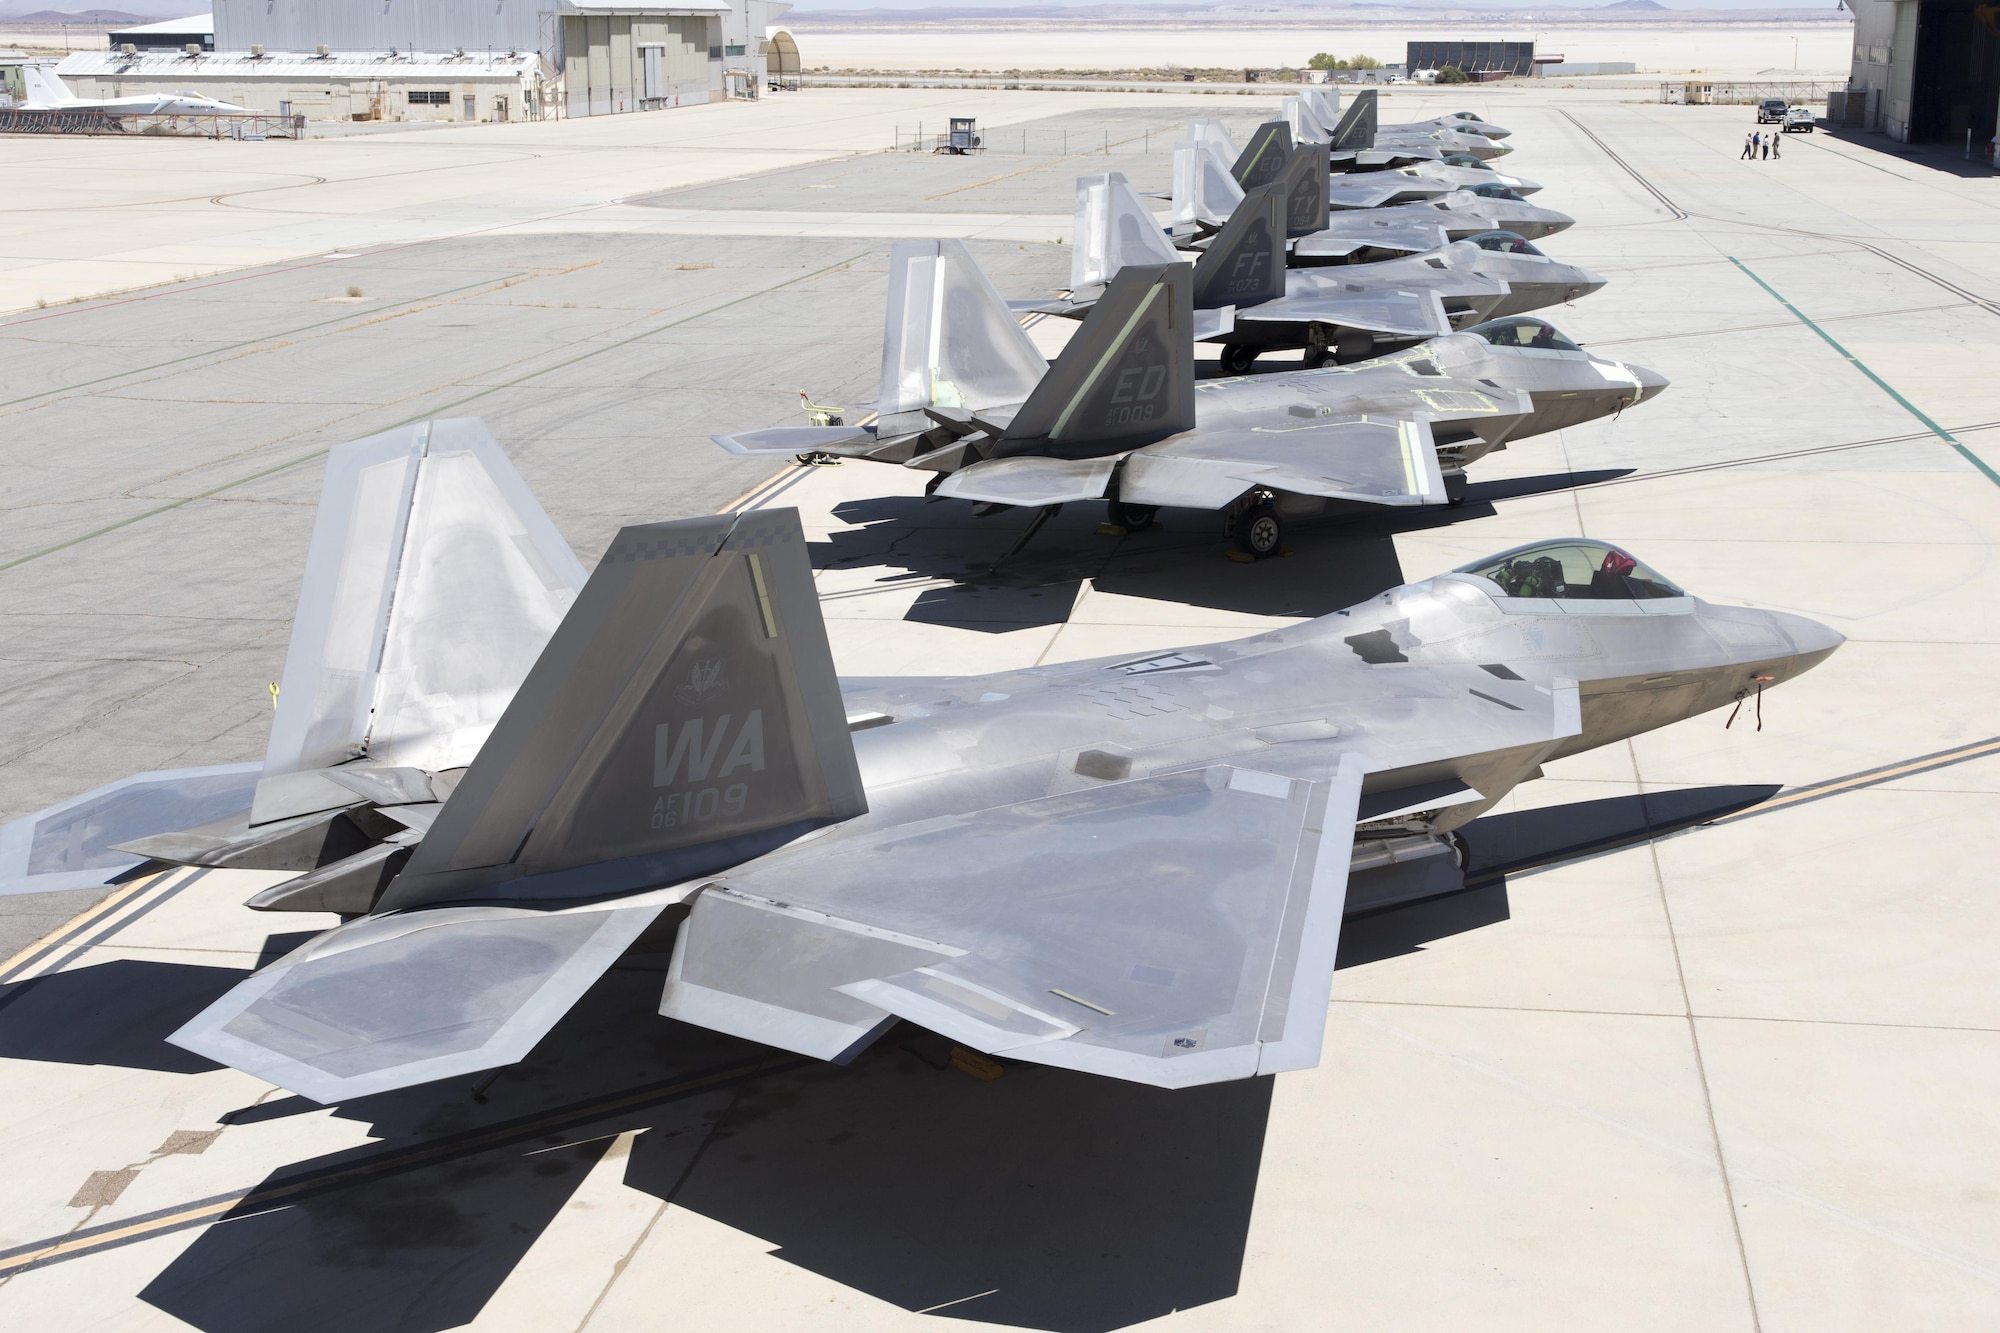 Seven F-22A Raptors sit outside the 411th Flight Test Squadron Aug. 10. Four operational jets from three different bases are at Edwards for testing to help improve the long-term combat capability of the F-22 Raptor. (U.S. Air Force photo by Christian Turner)